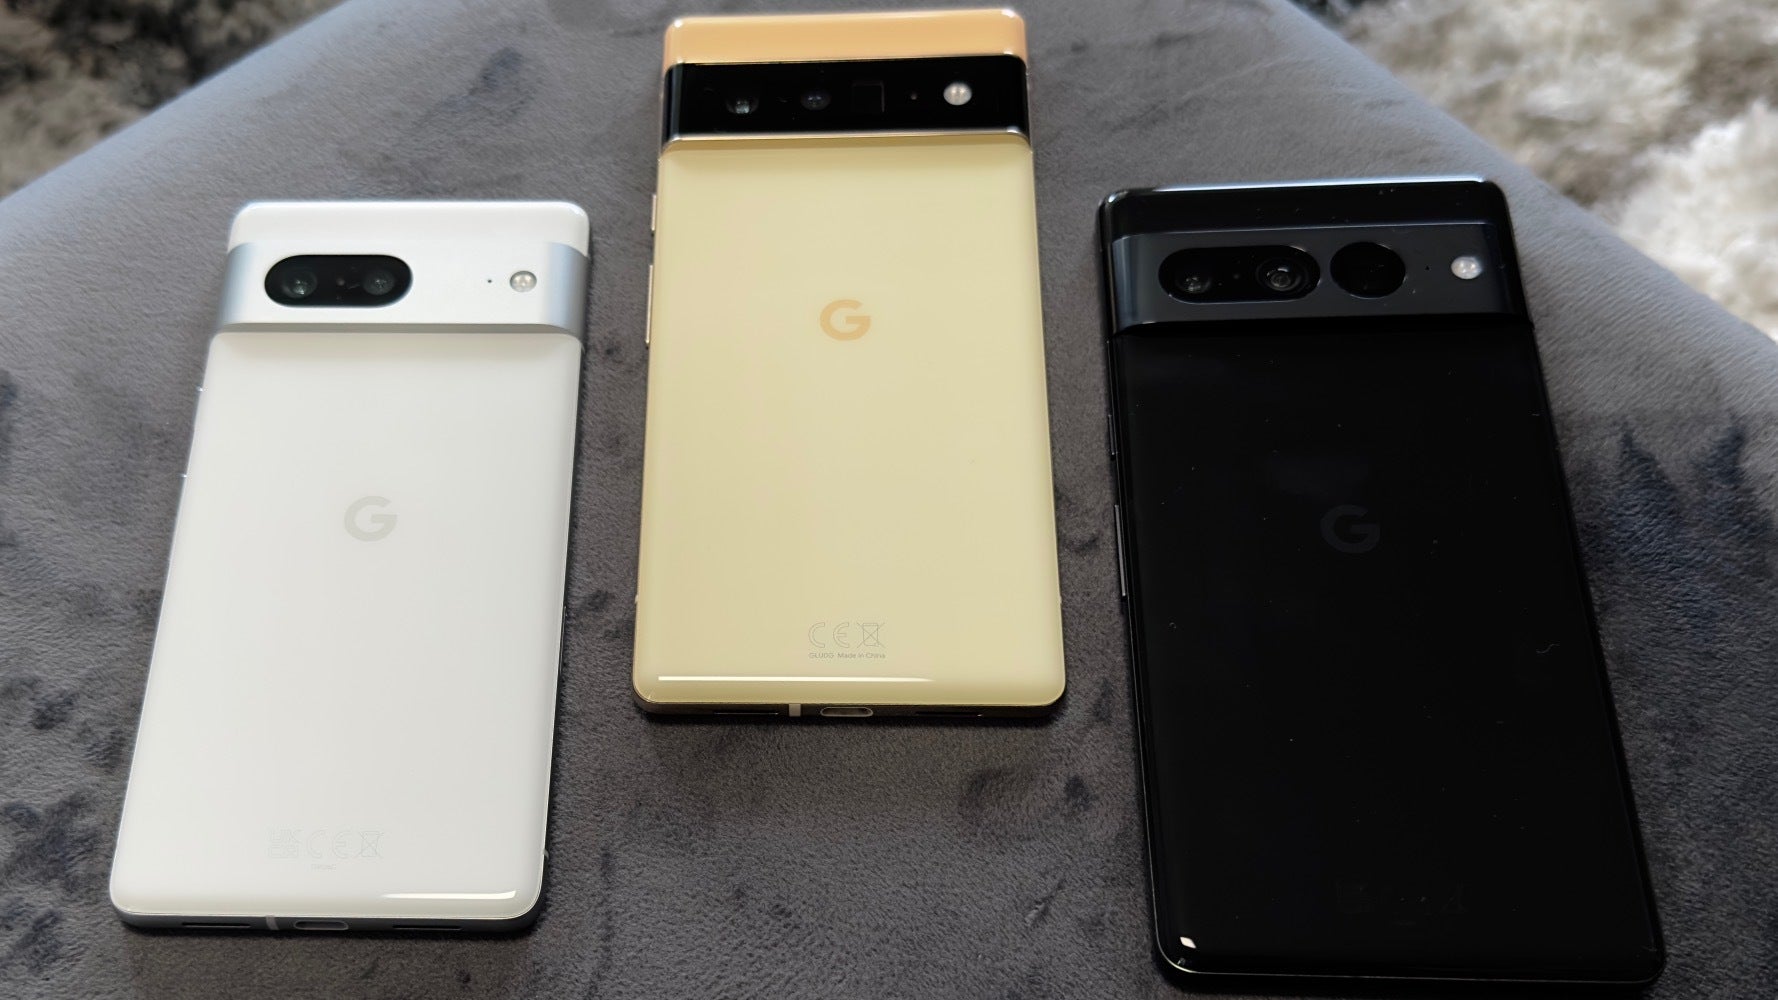 Copy this Apple thing, Google! - Google gone mad! Scrapping iconic Pixel 6 design for basic Pixel 7 - a mistake Apple wouldn’t make